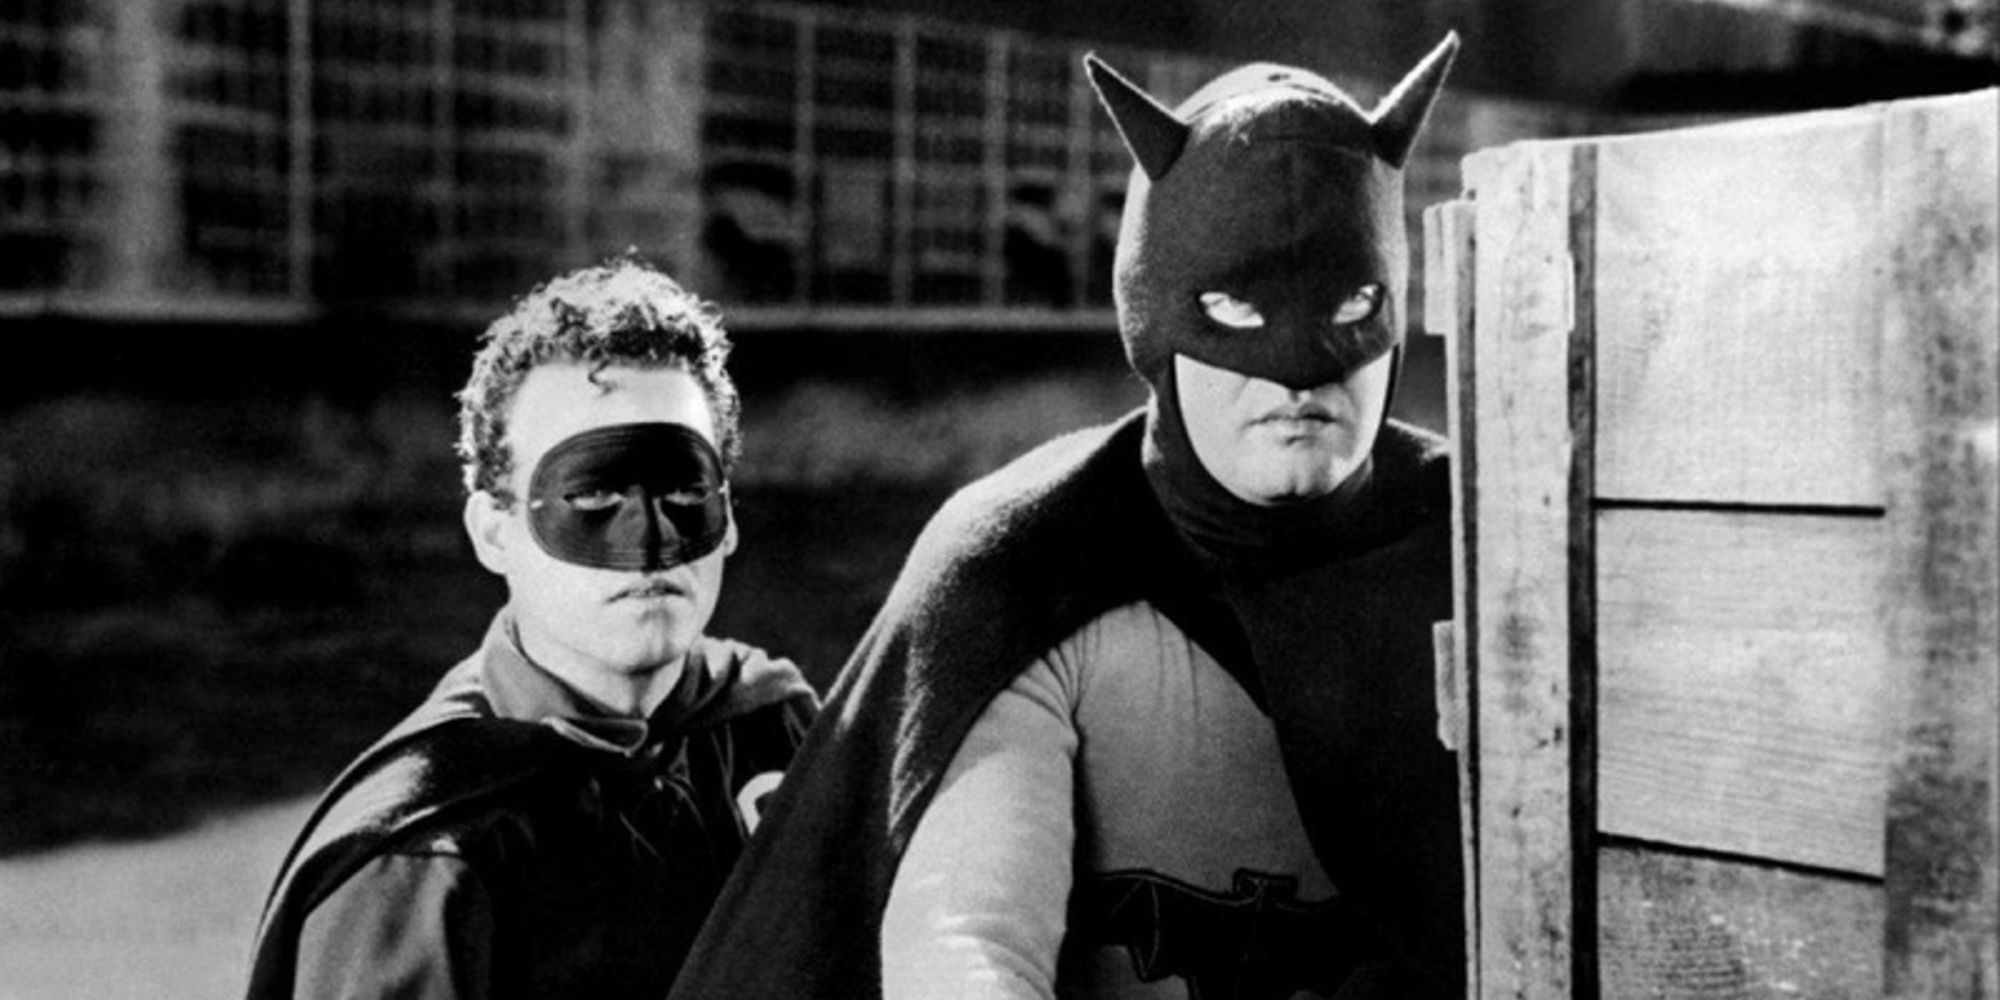 Robert Lowery and Johnny Duncan as Batman and Robin in the 1949 serials